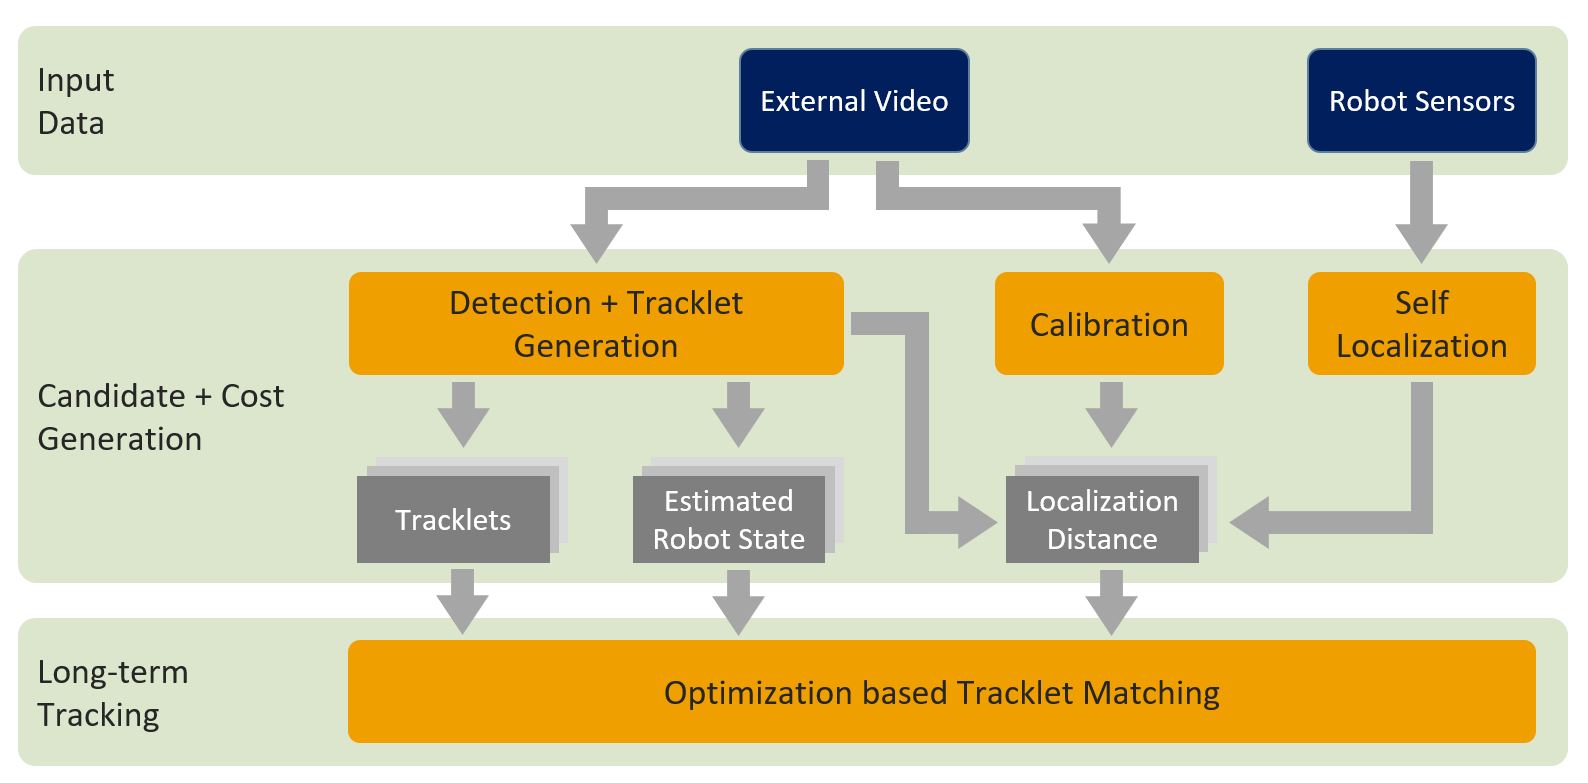 Optimizing Long-Term Player Tracking and Identification in NAO Robot Soccer by fusing Game-state and External Video